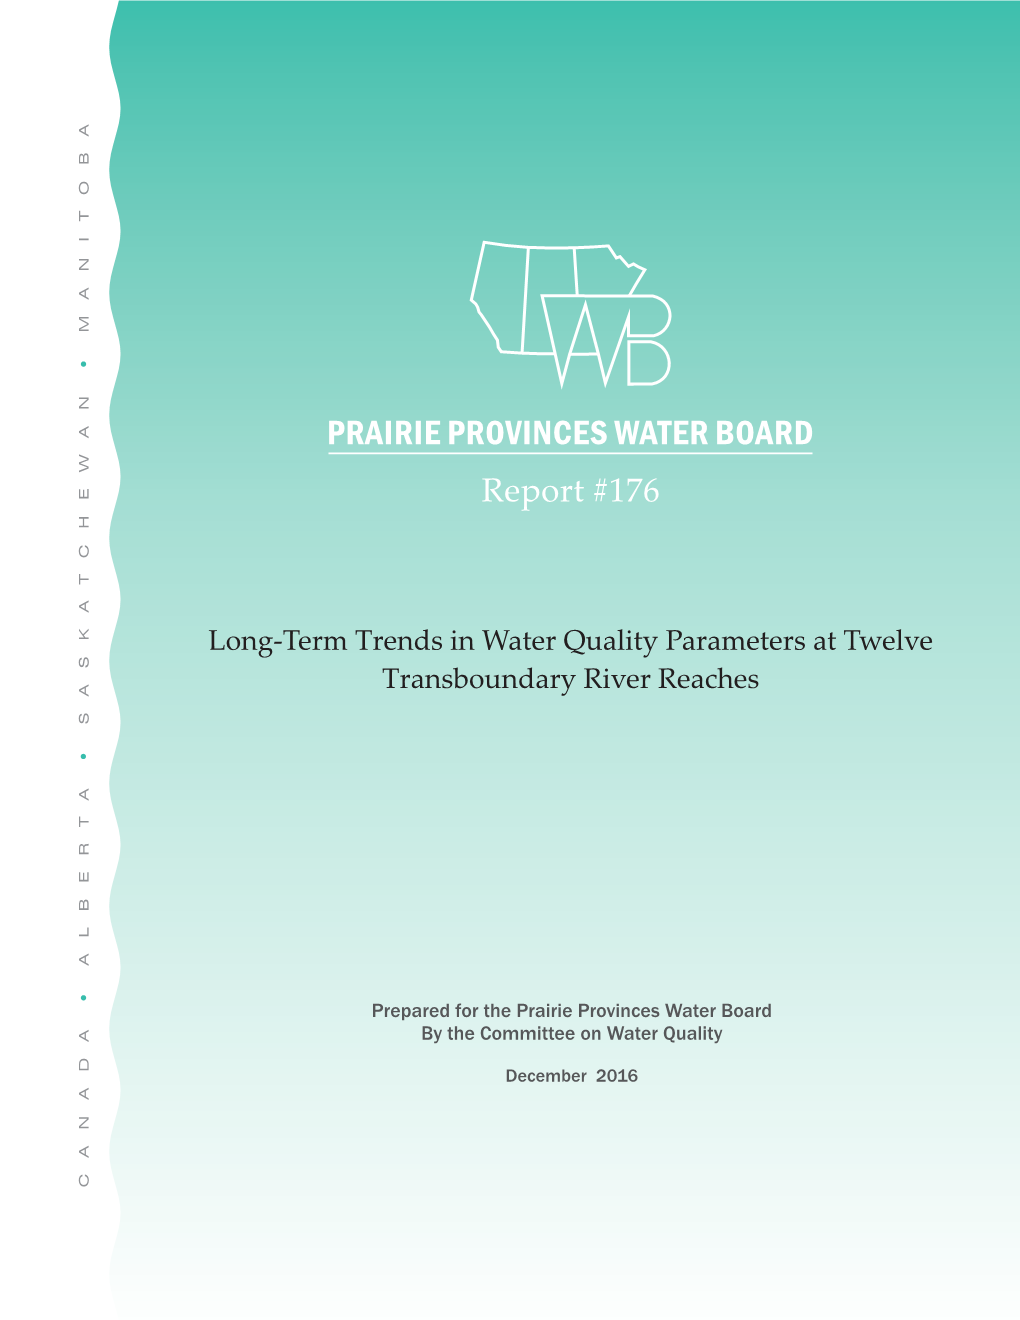 Long-Term Trends in Water Quality Parameters at Twelve Transboundary River Reaches